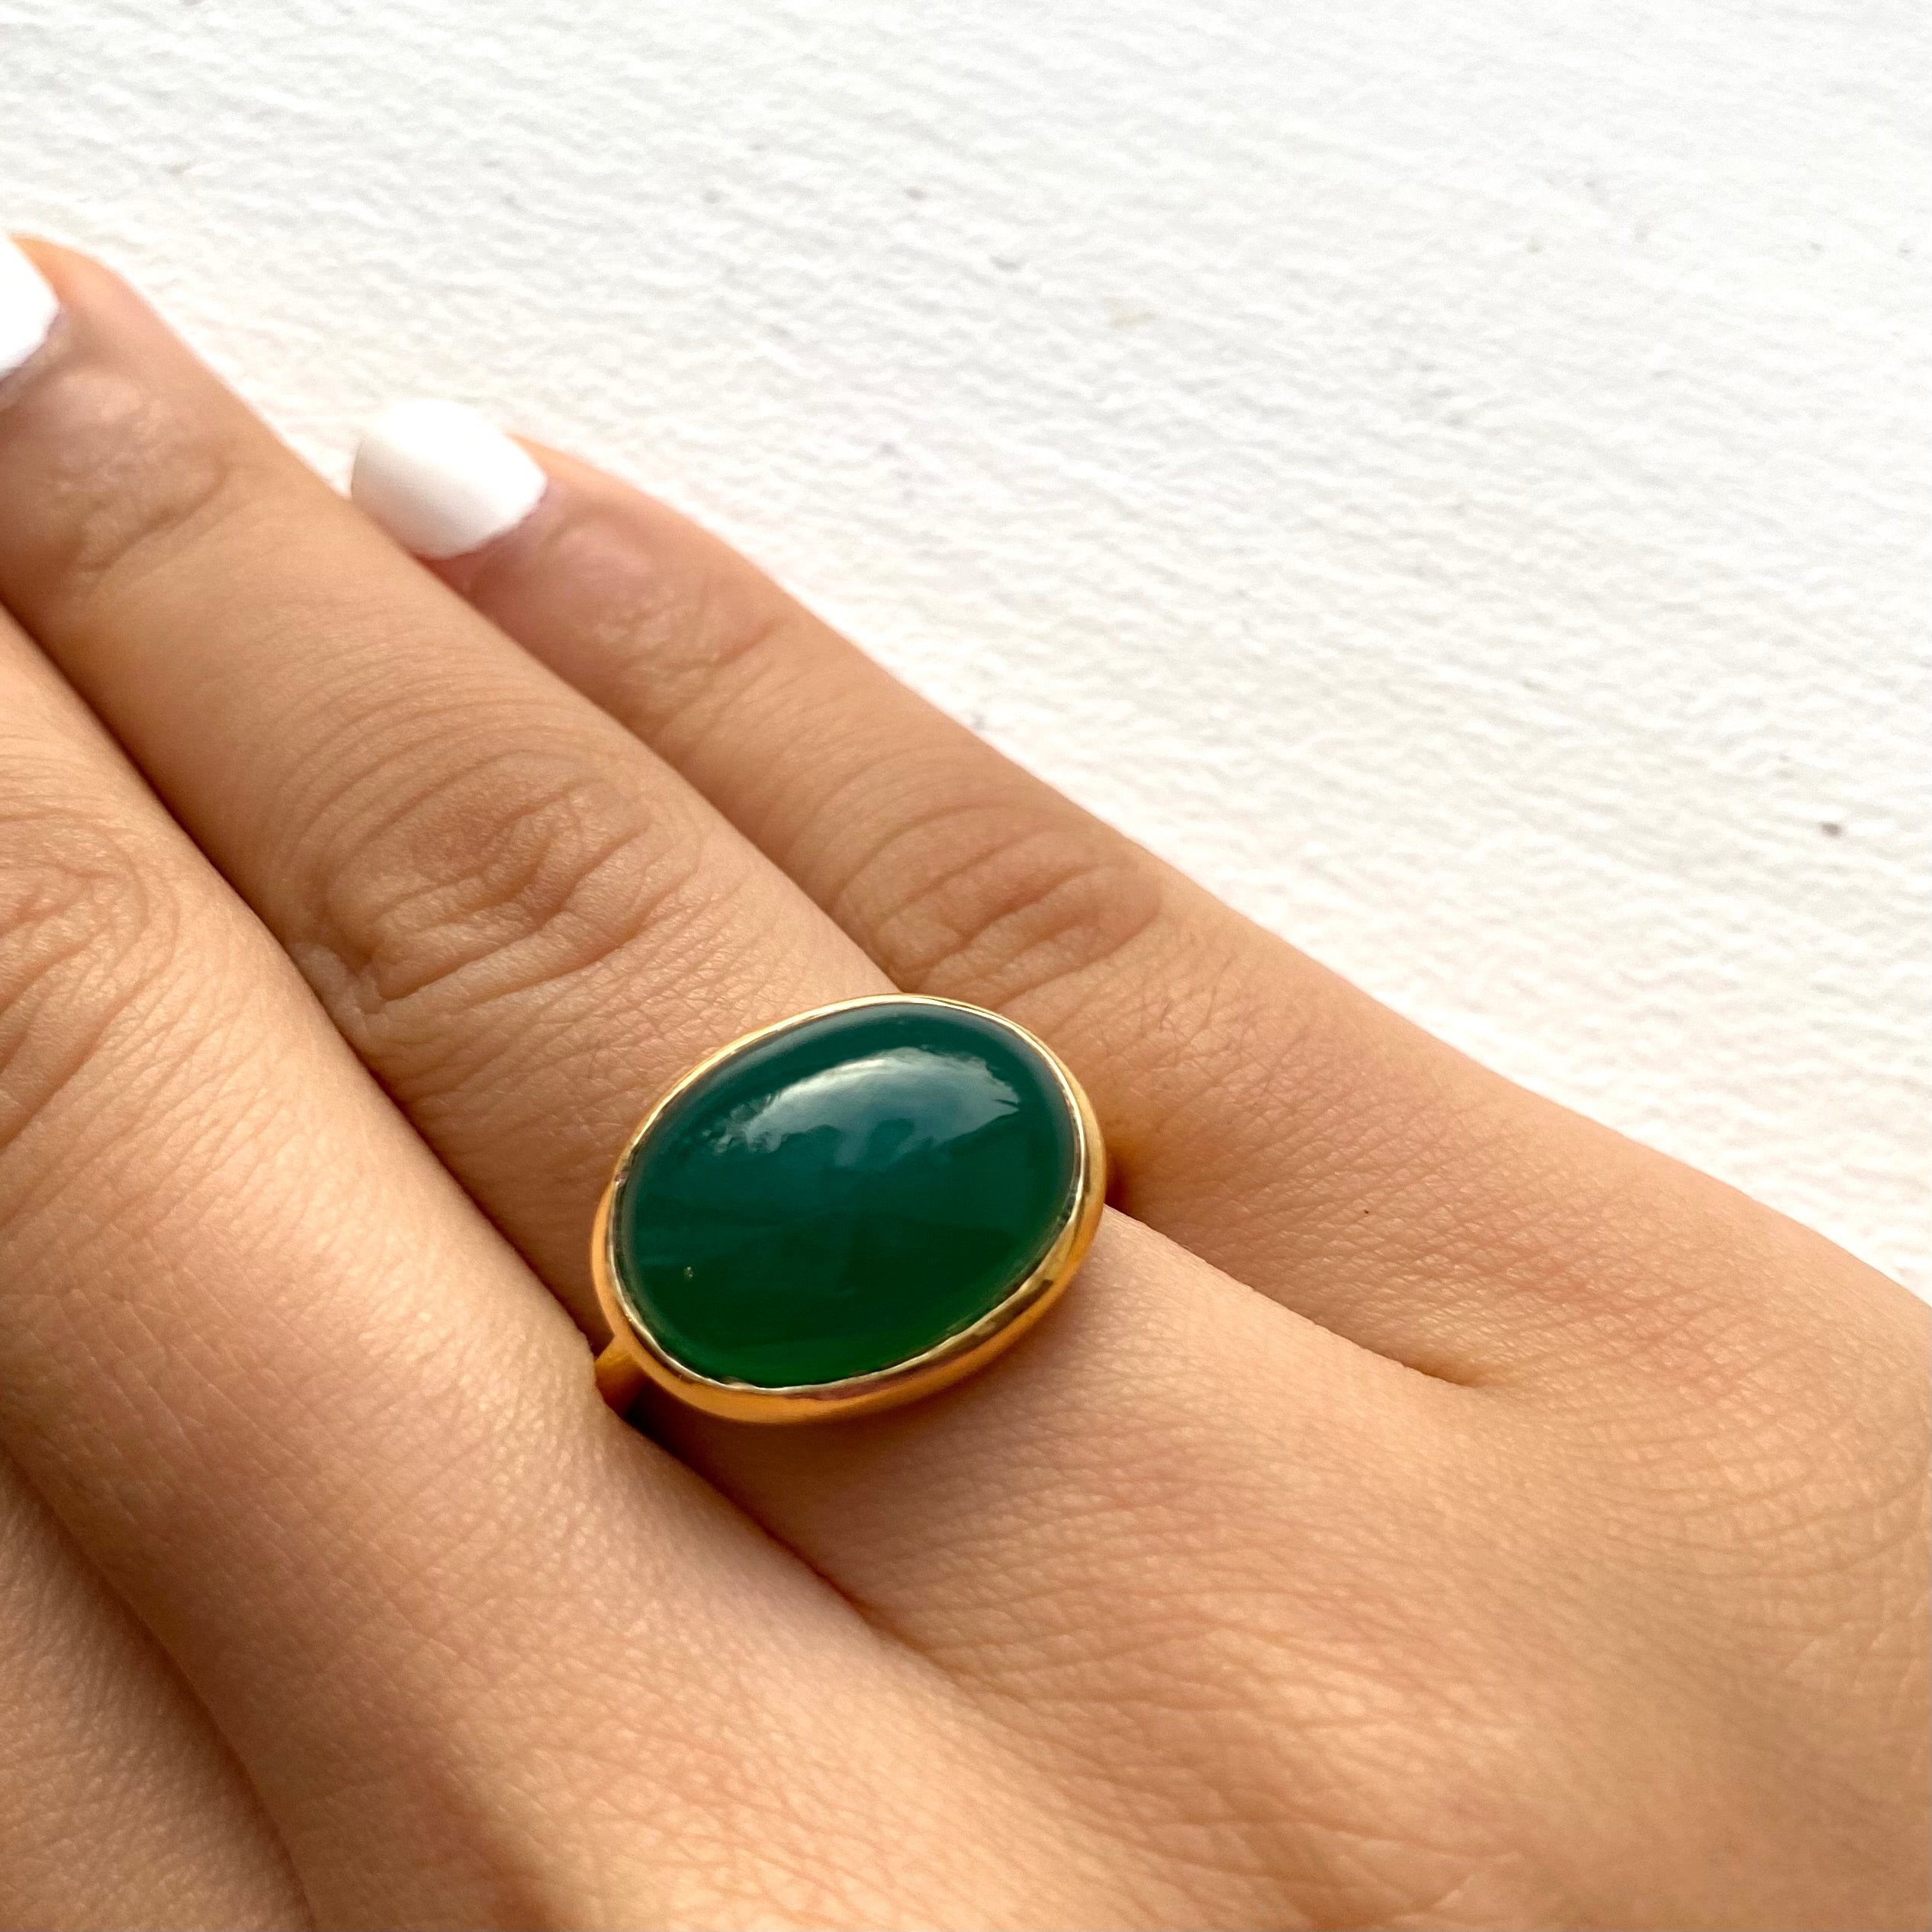 Cabochon Oval Cut Natural Gemstone Gold Plated Sterling Silver Ring - Green Onyx